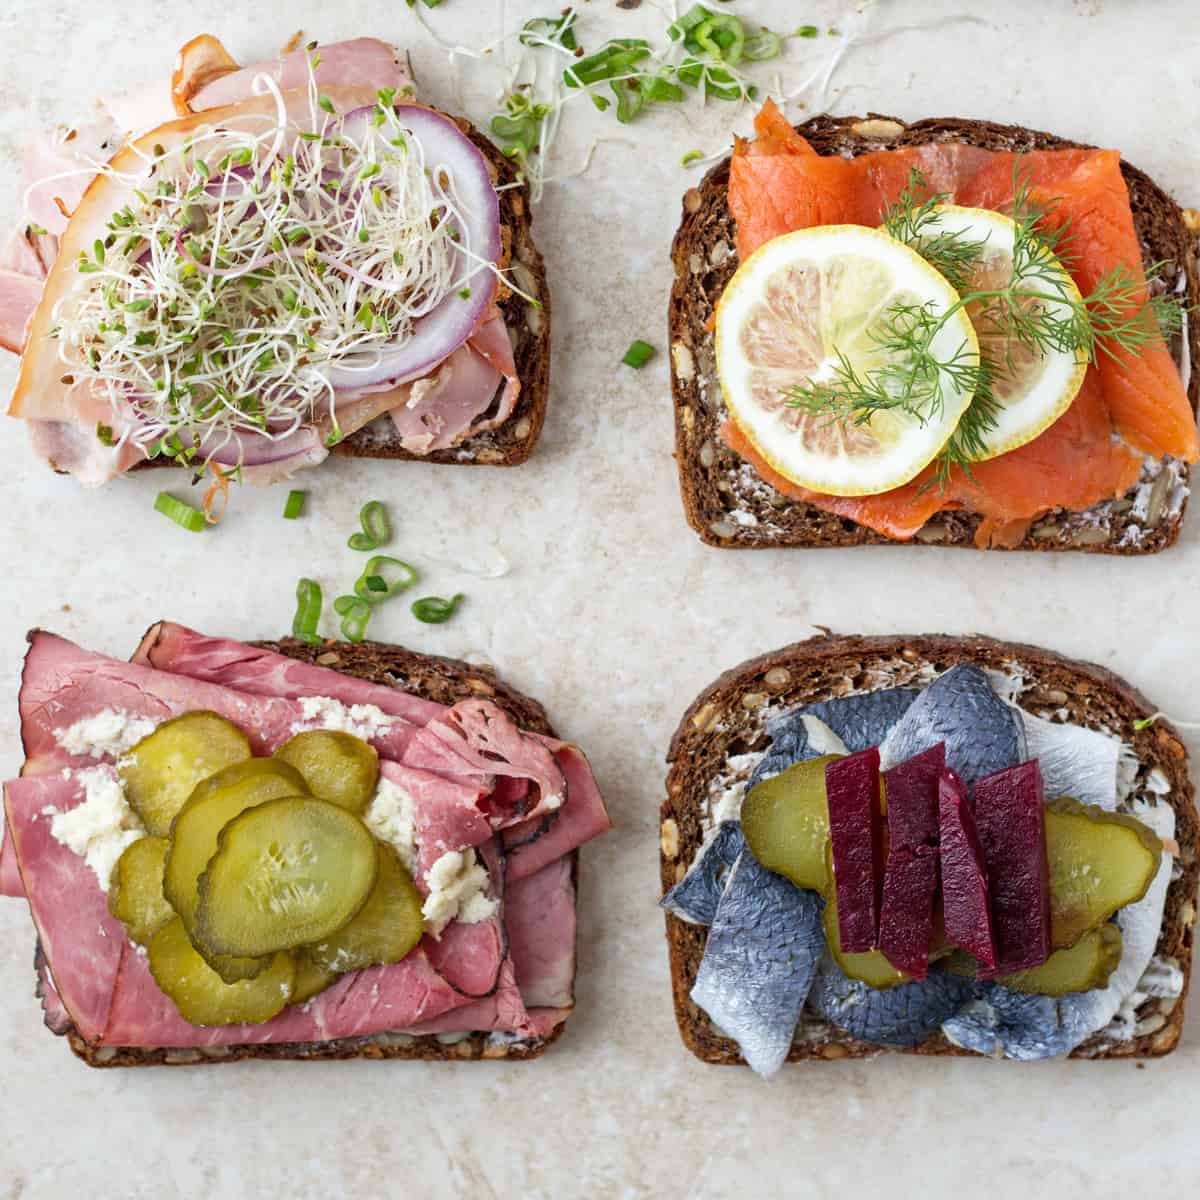 Scandinavian traditional sandwiches with meat and fish topped with pickles, roasted beets and lemon by ilonaspassion.com I @ilonaspassion